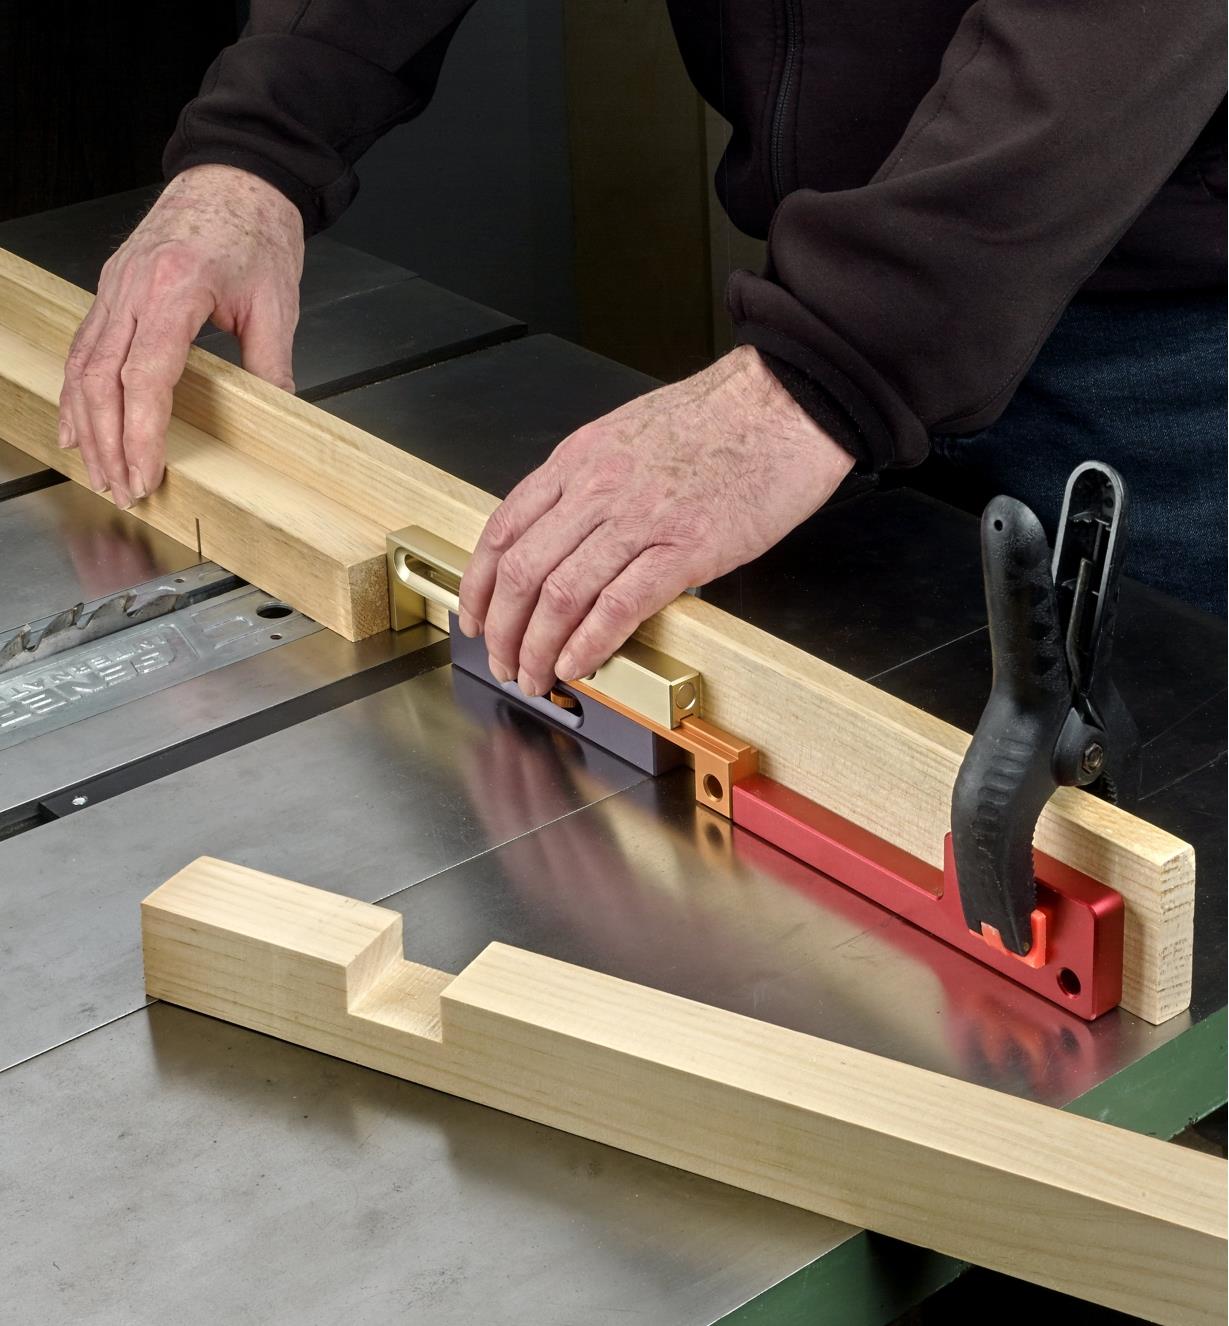 The large Kerfmaker inverted to position the second shoulder when making a lap joint on a table saw